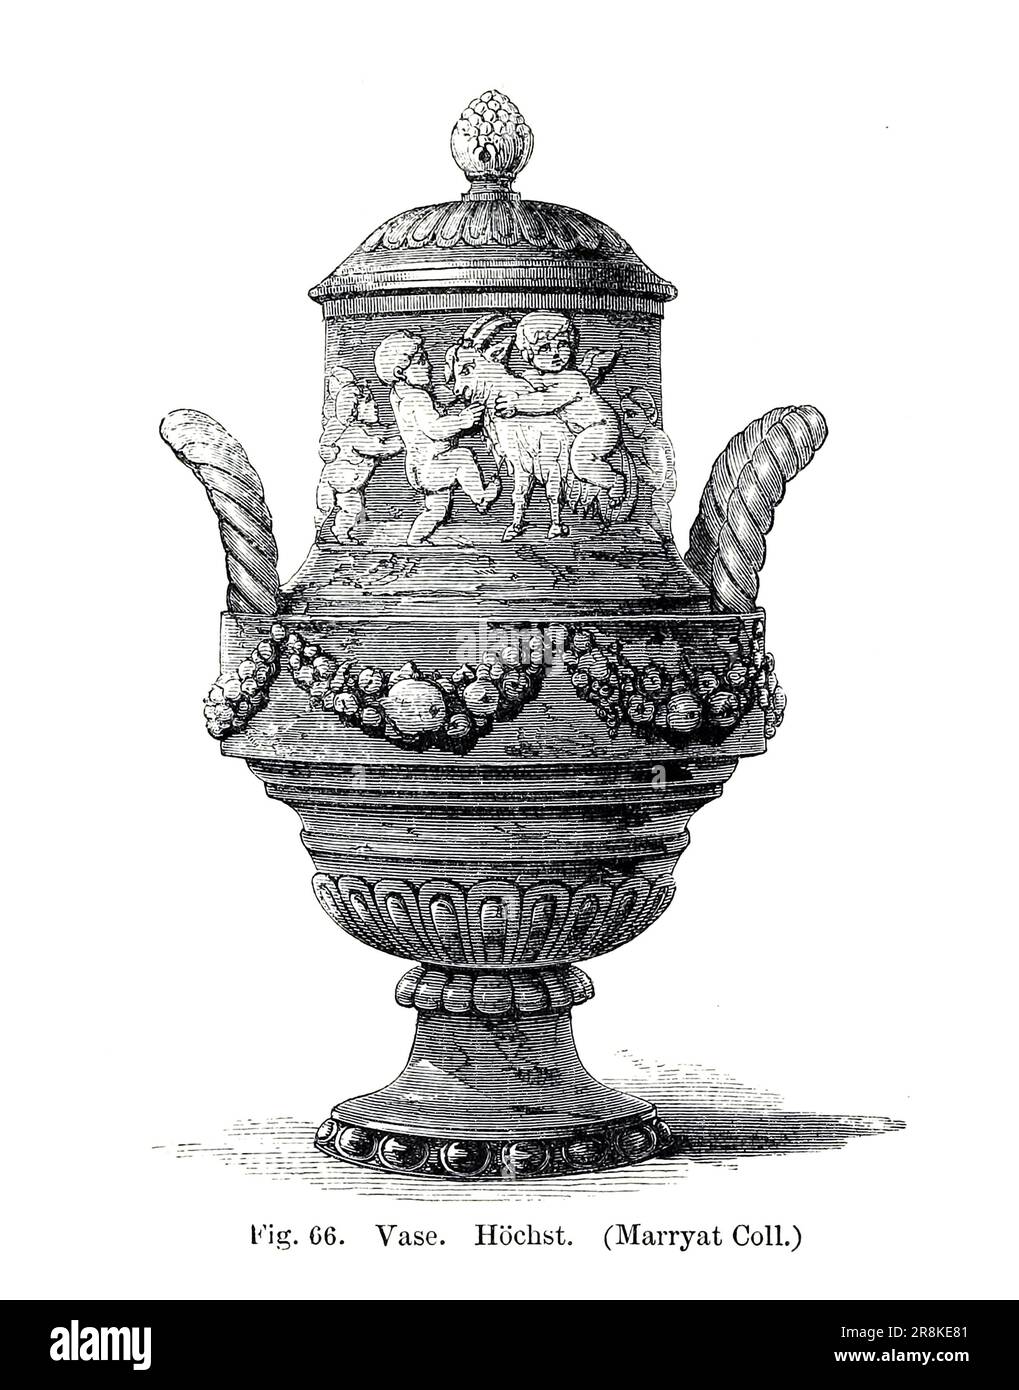 Vase Hochst from the book ' A history of pottery and porcelain, mediaeval and modern ' by Joseph Marryat, Published in London by John Murray, Albemarle Street in 1857 Stock Photo